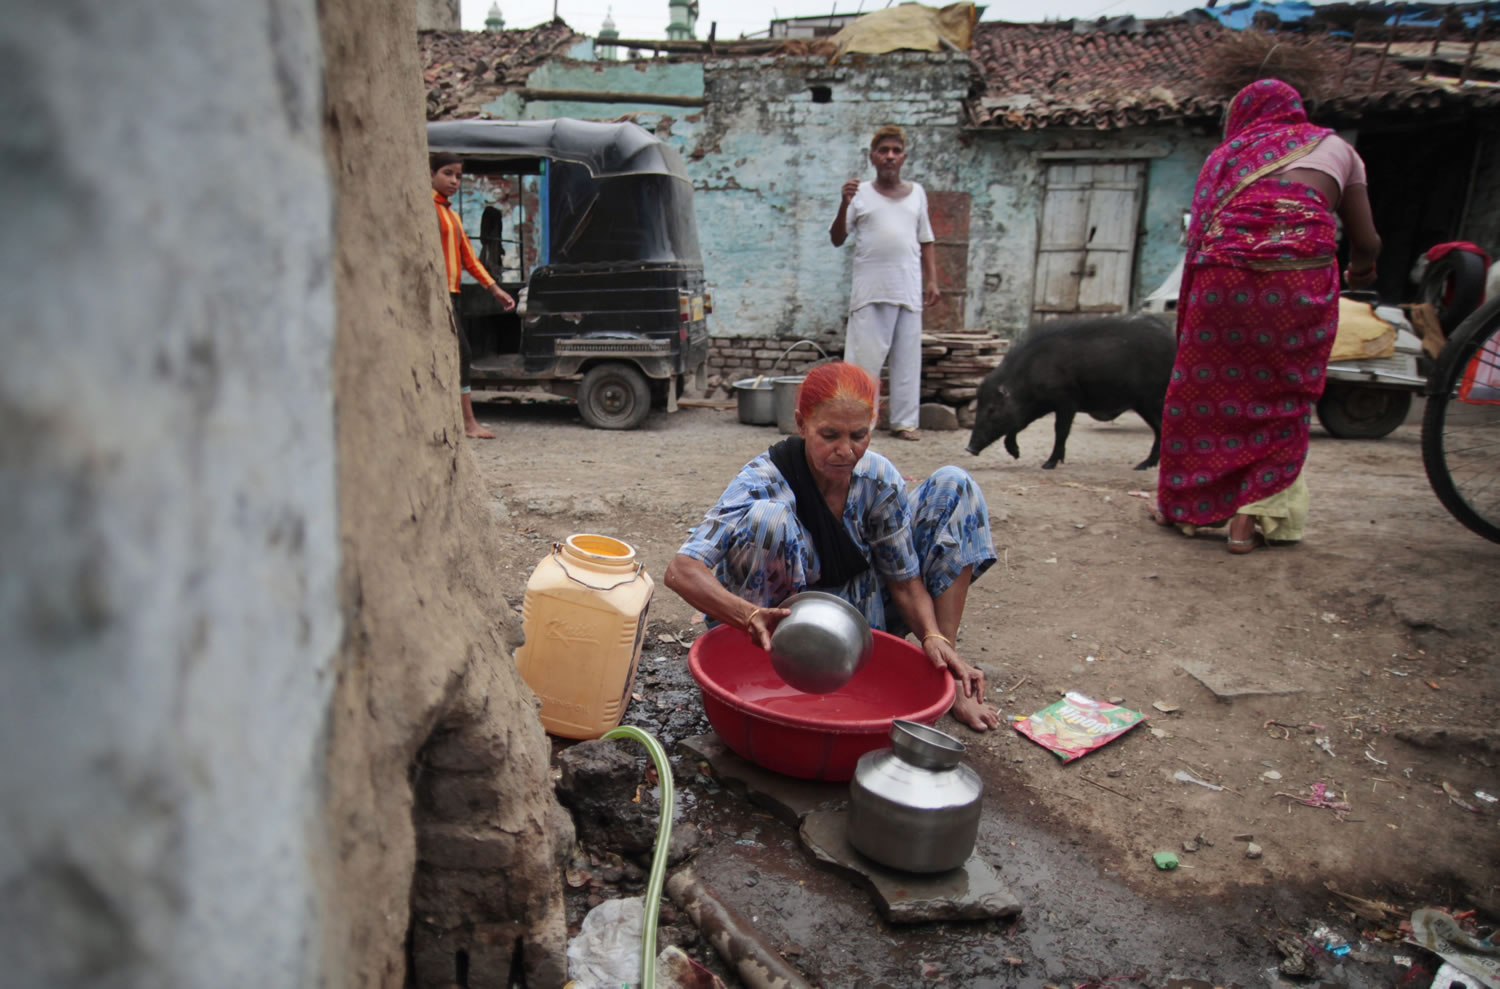 In this May 10, 2012 photo, Fatima Munshi collects water for domestic consumption from a community faucet outside her home in Khandwa, India. Living in Australia, Saroo Brierley, 30, was reunited with his biological mother, Munshi, in February 2012, 25 years after an ill-fated train ride left him an orphan on the streets of Calcutta.